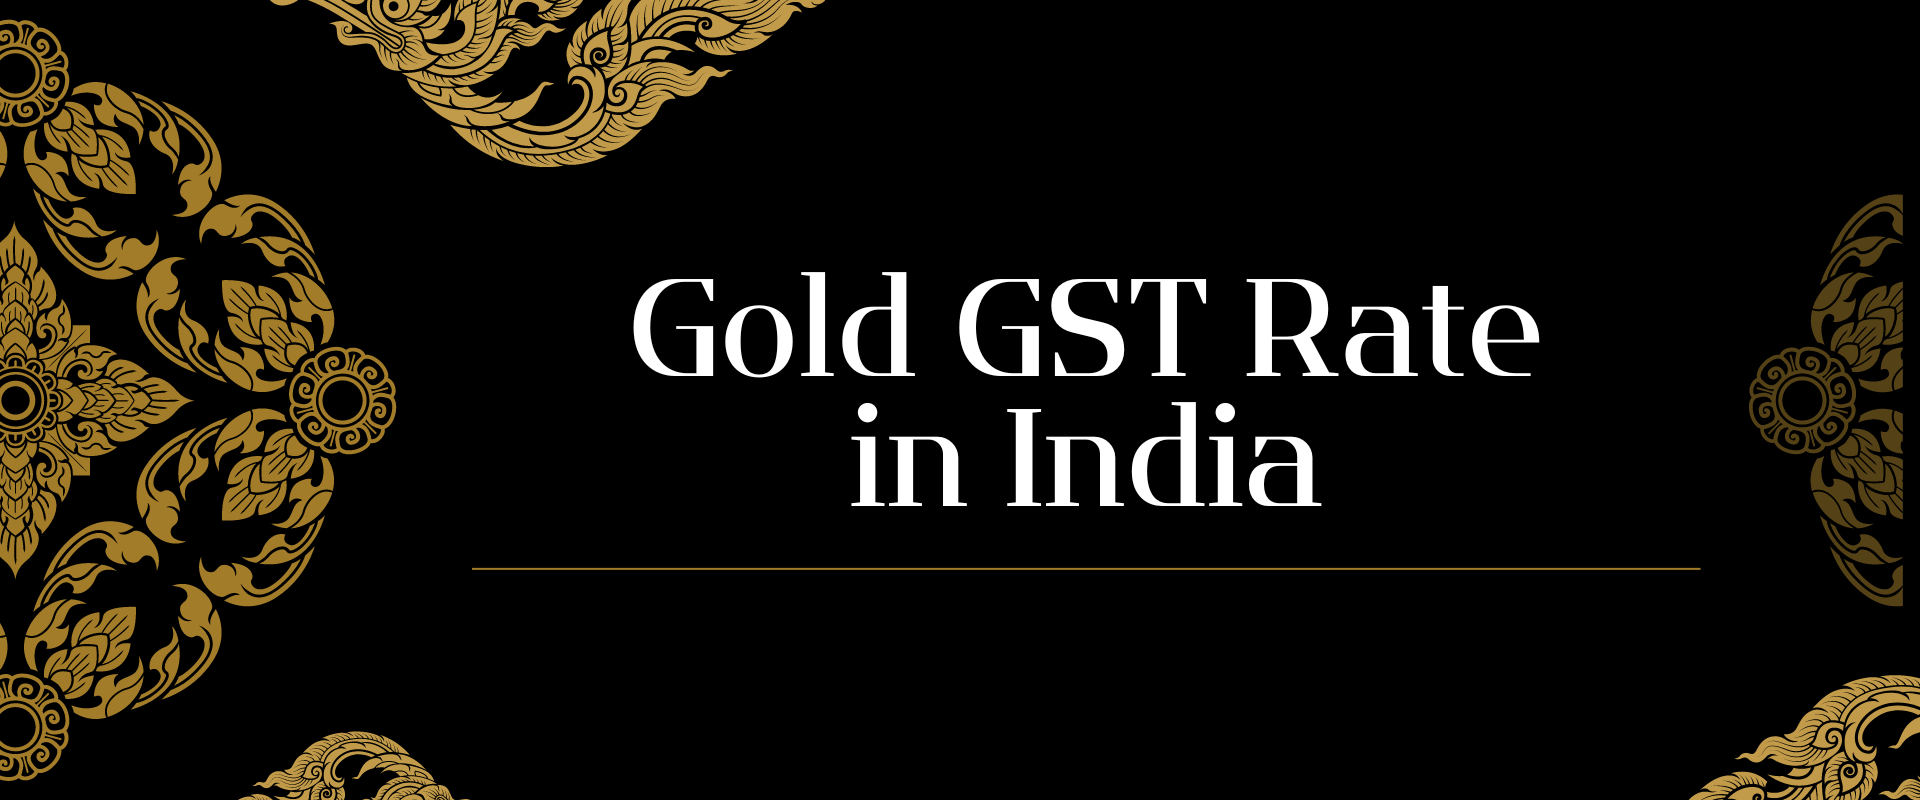 Gold GST Rate in India